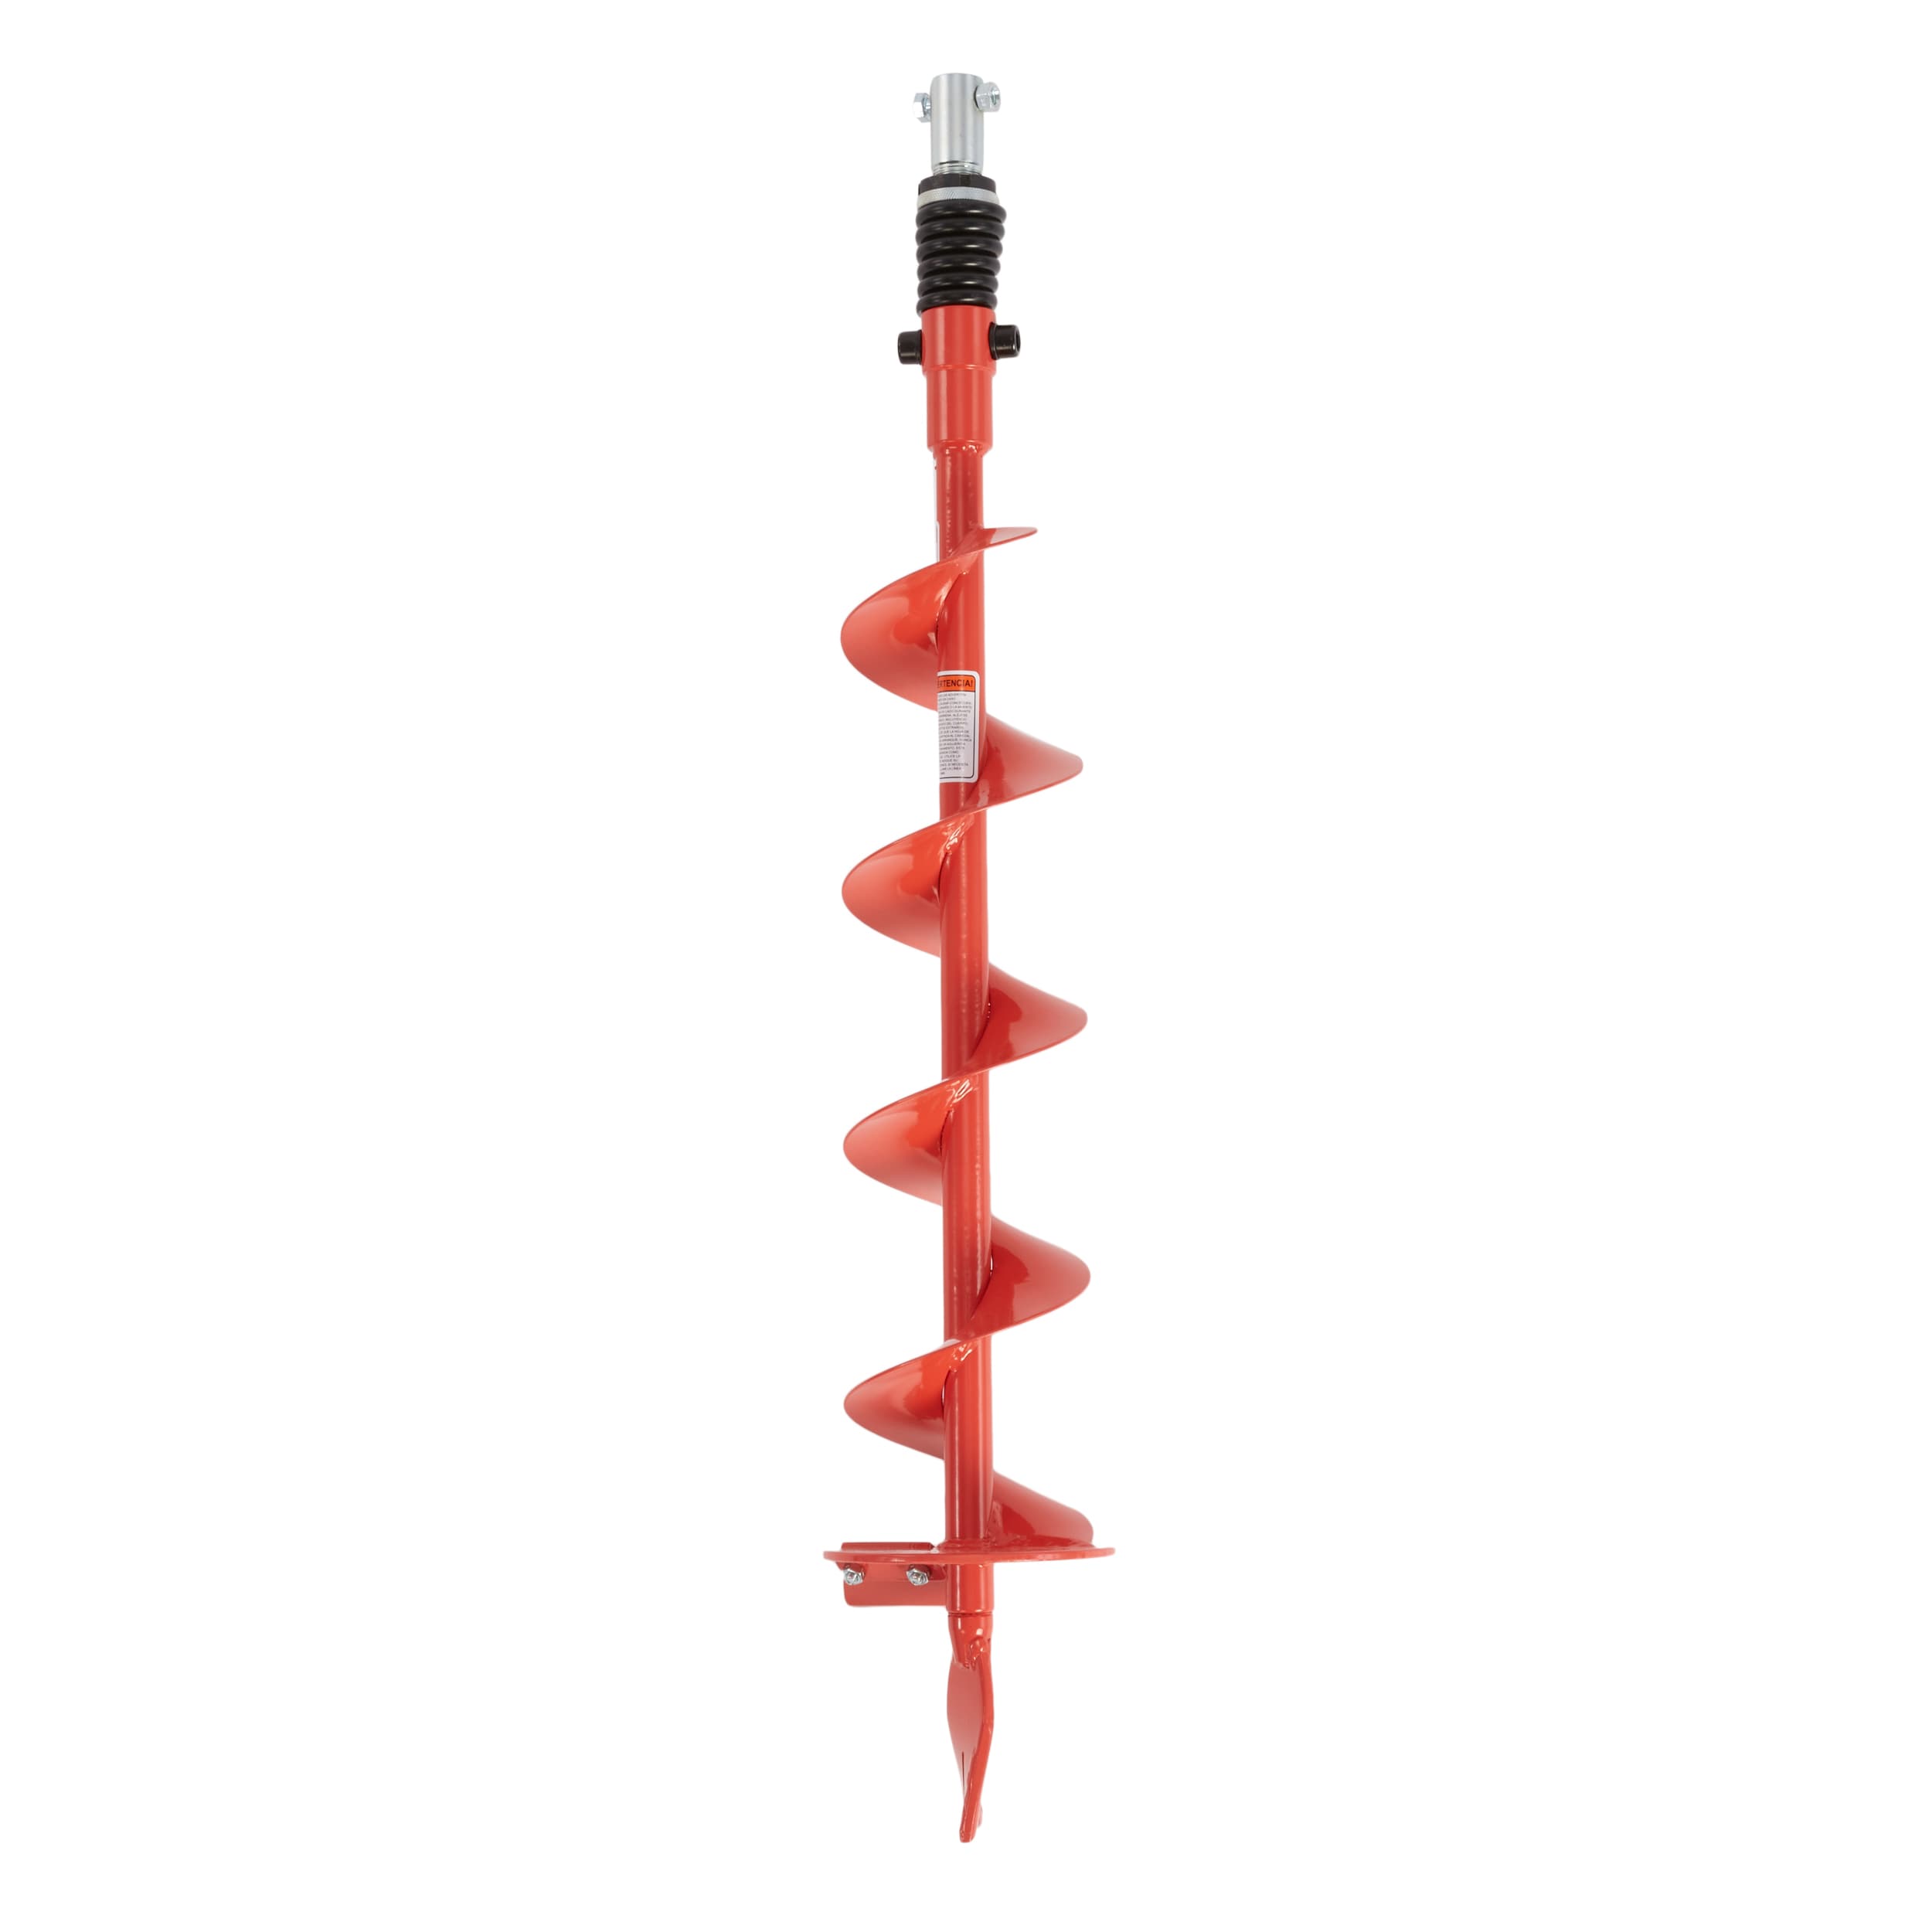 ThunderBay 6 In. Earth Auger Bit - Welded Steel Construction, Replaceable  Cutting Blades, Fits Most Powerheads in the Auger Bits department at